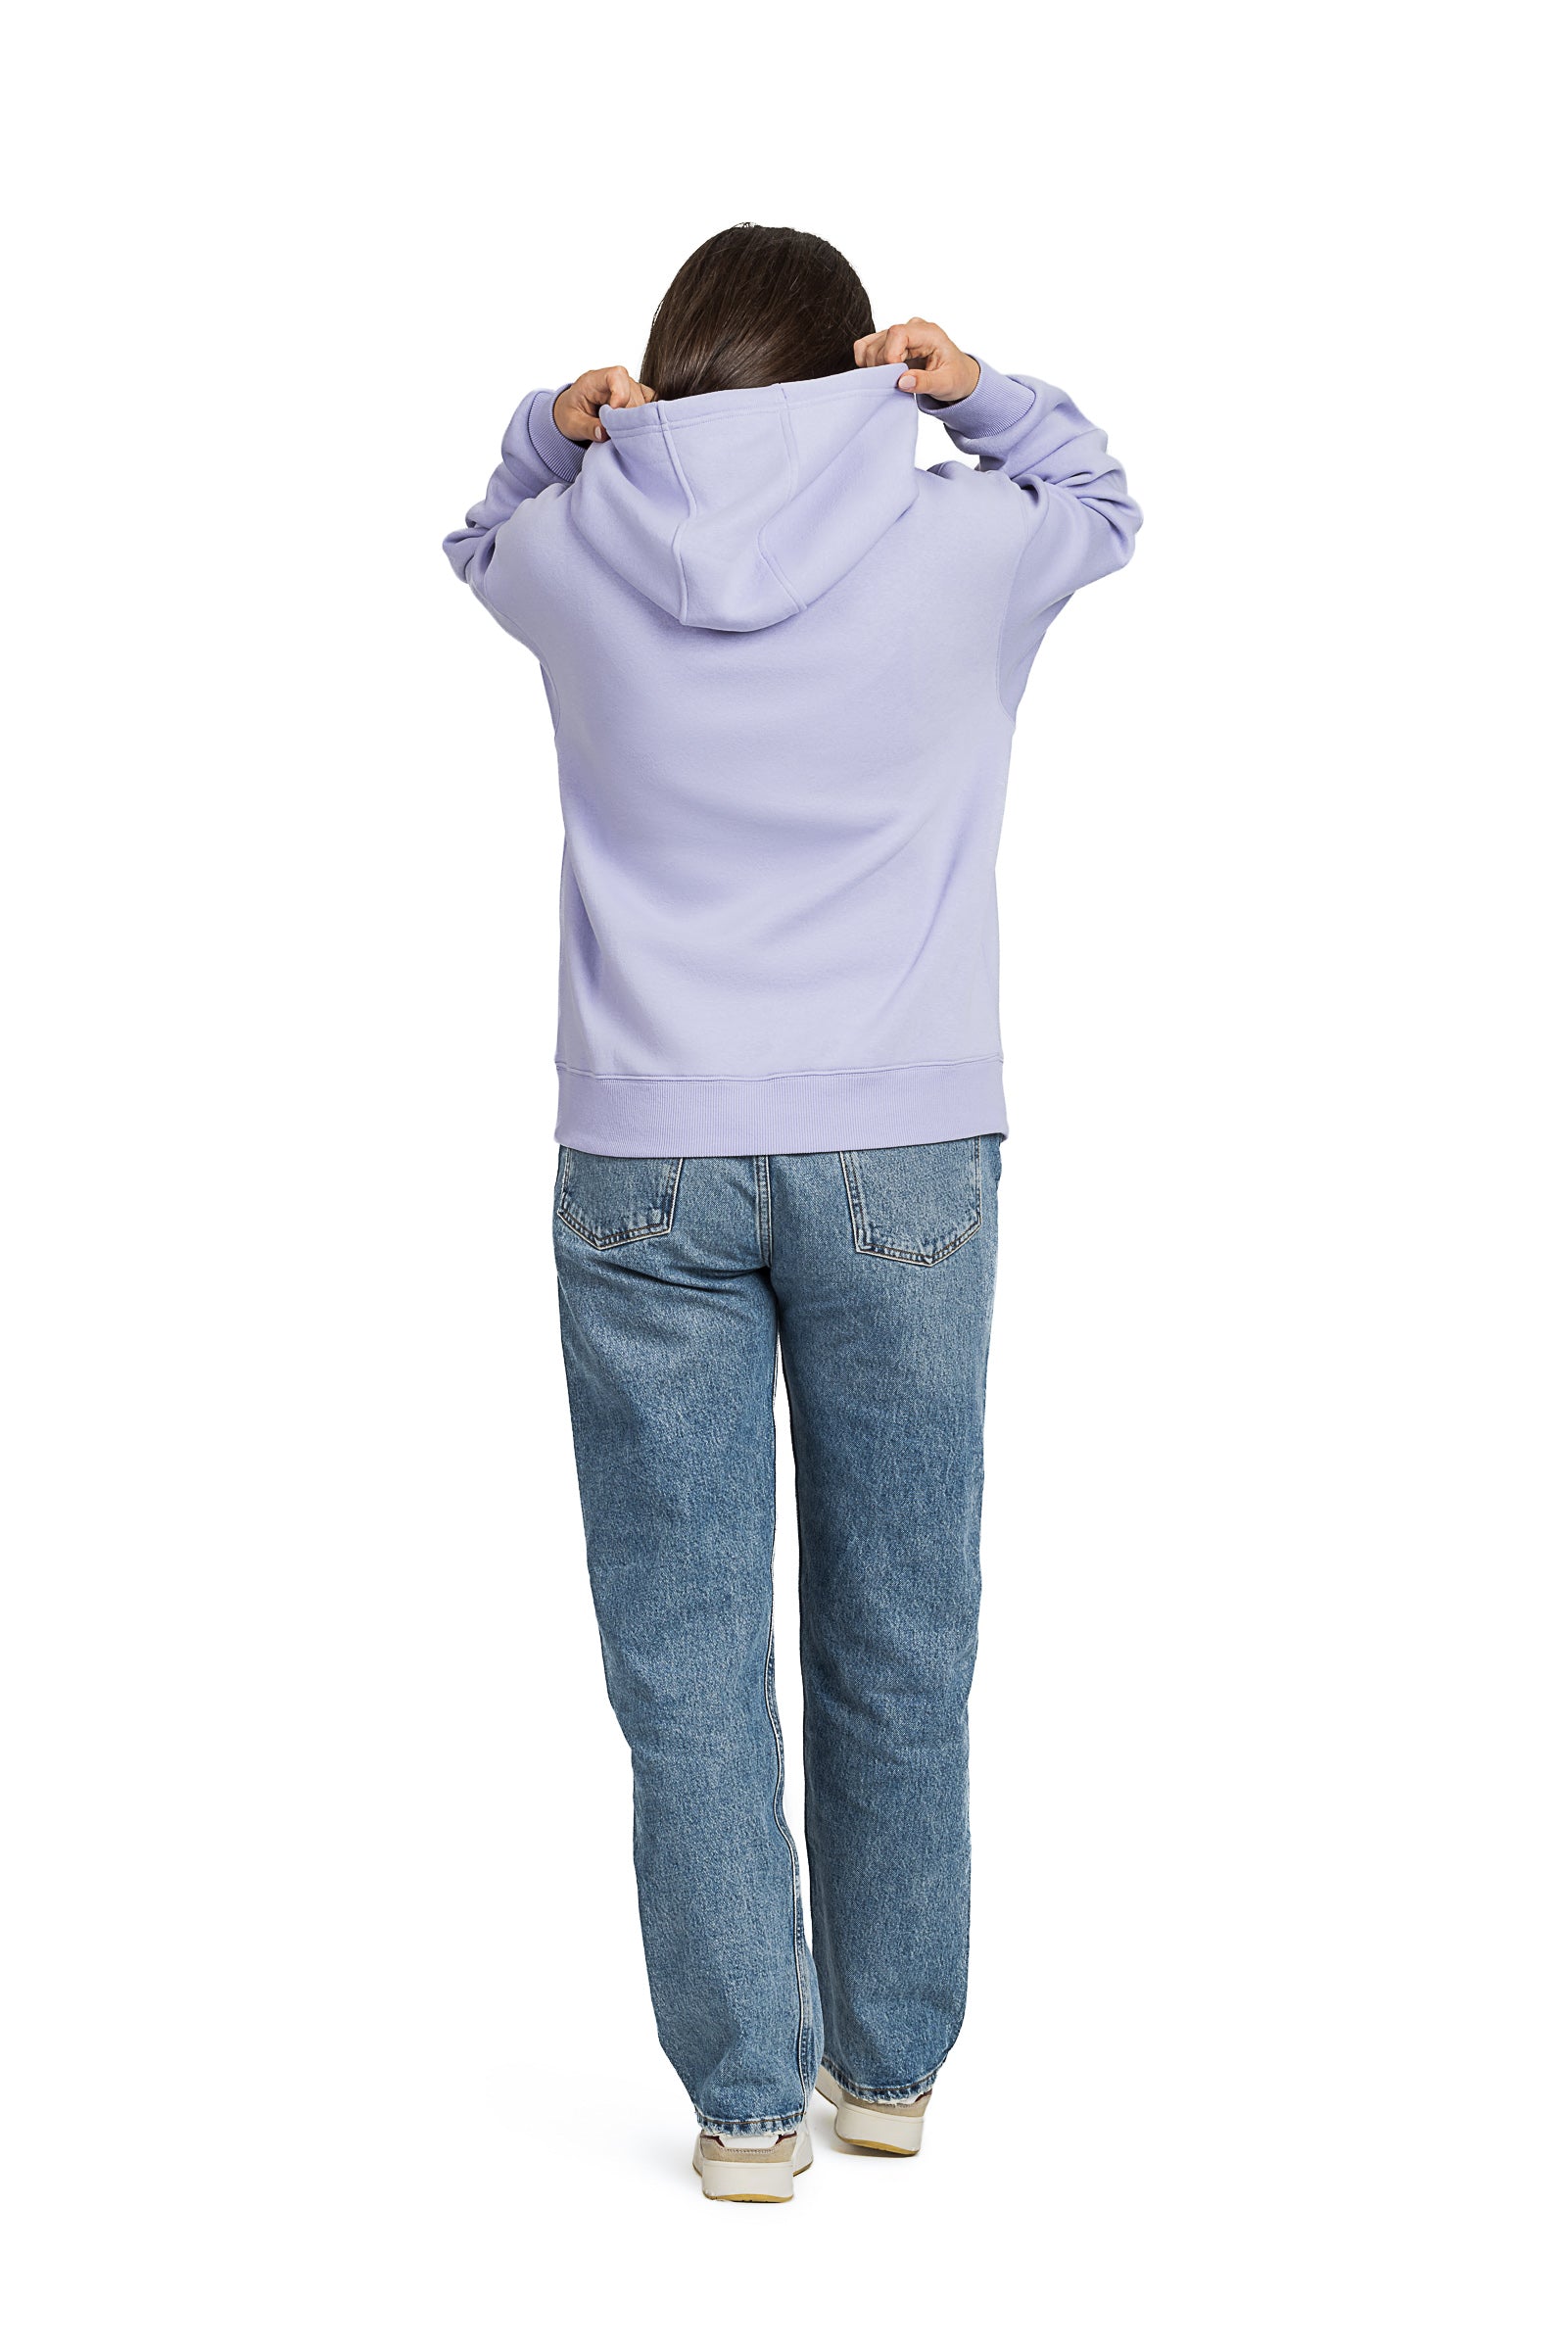 Cheeky relaxed hoodie in lavender